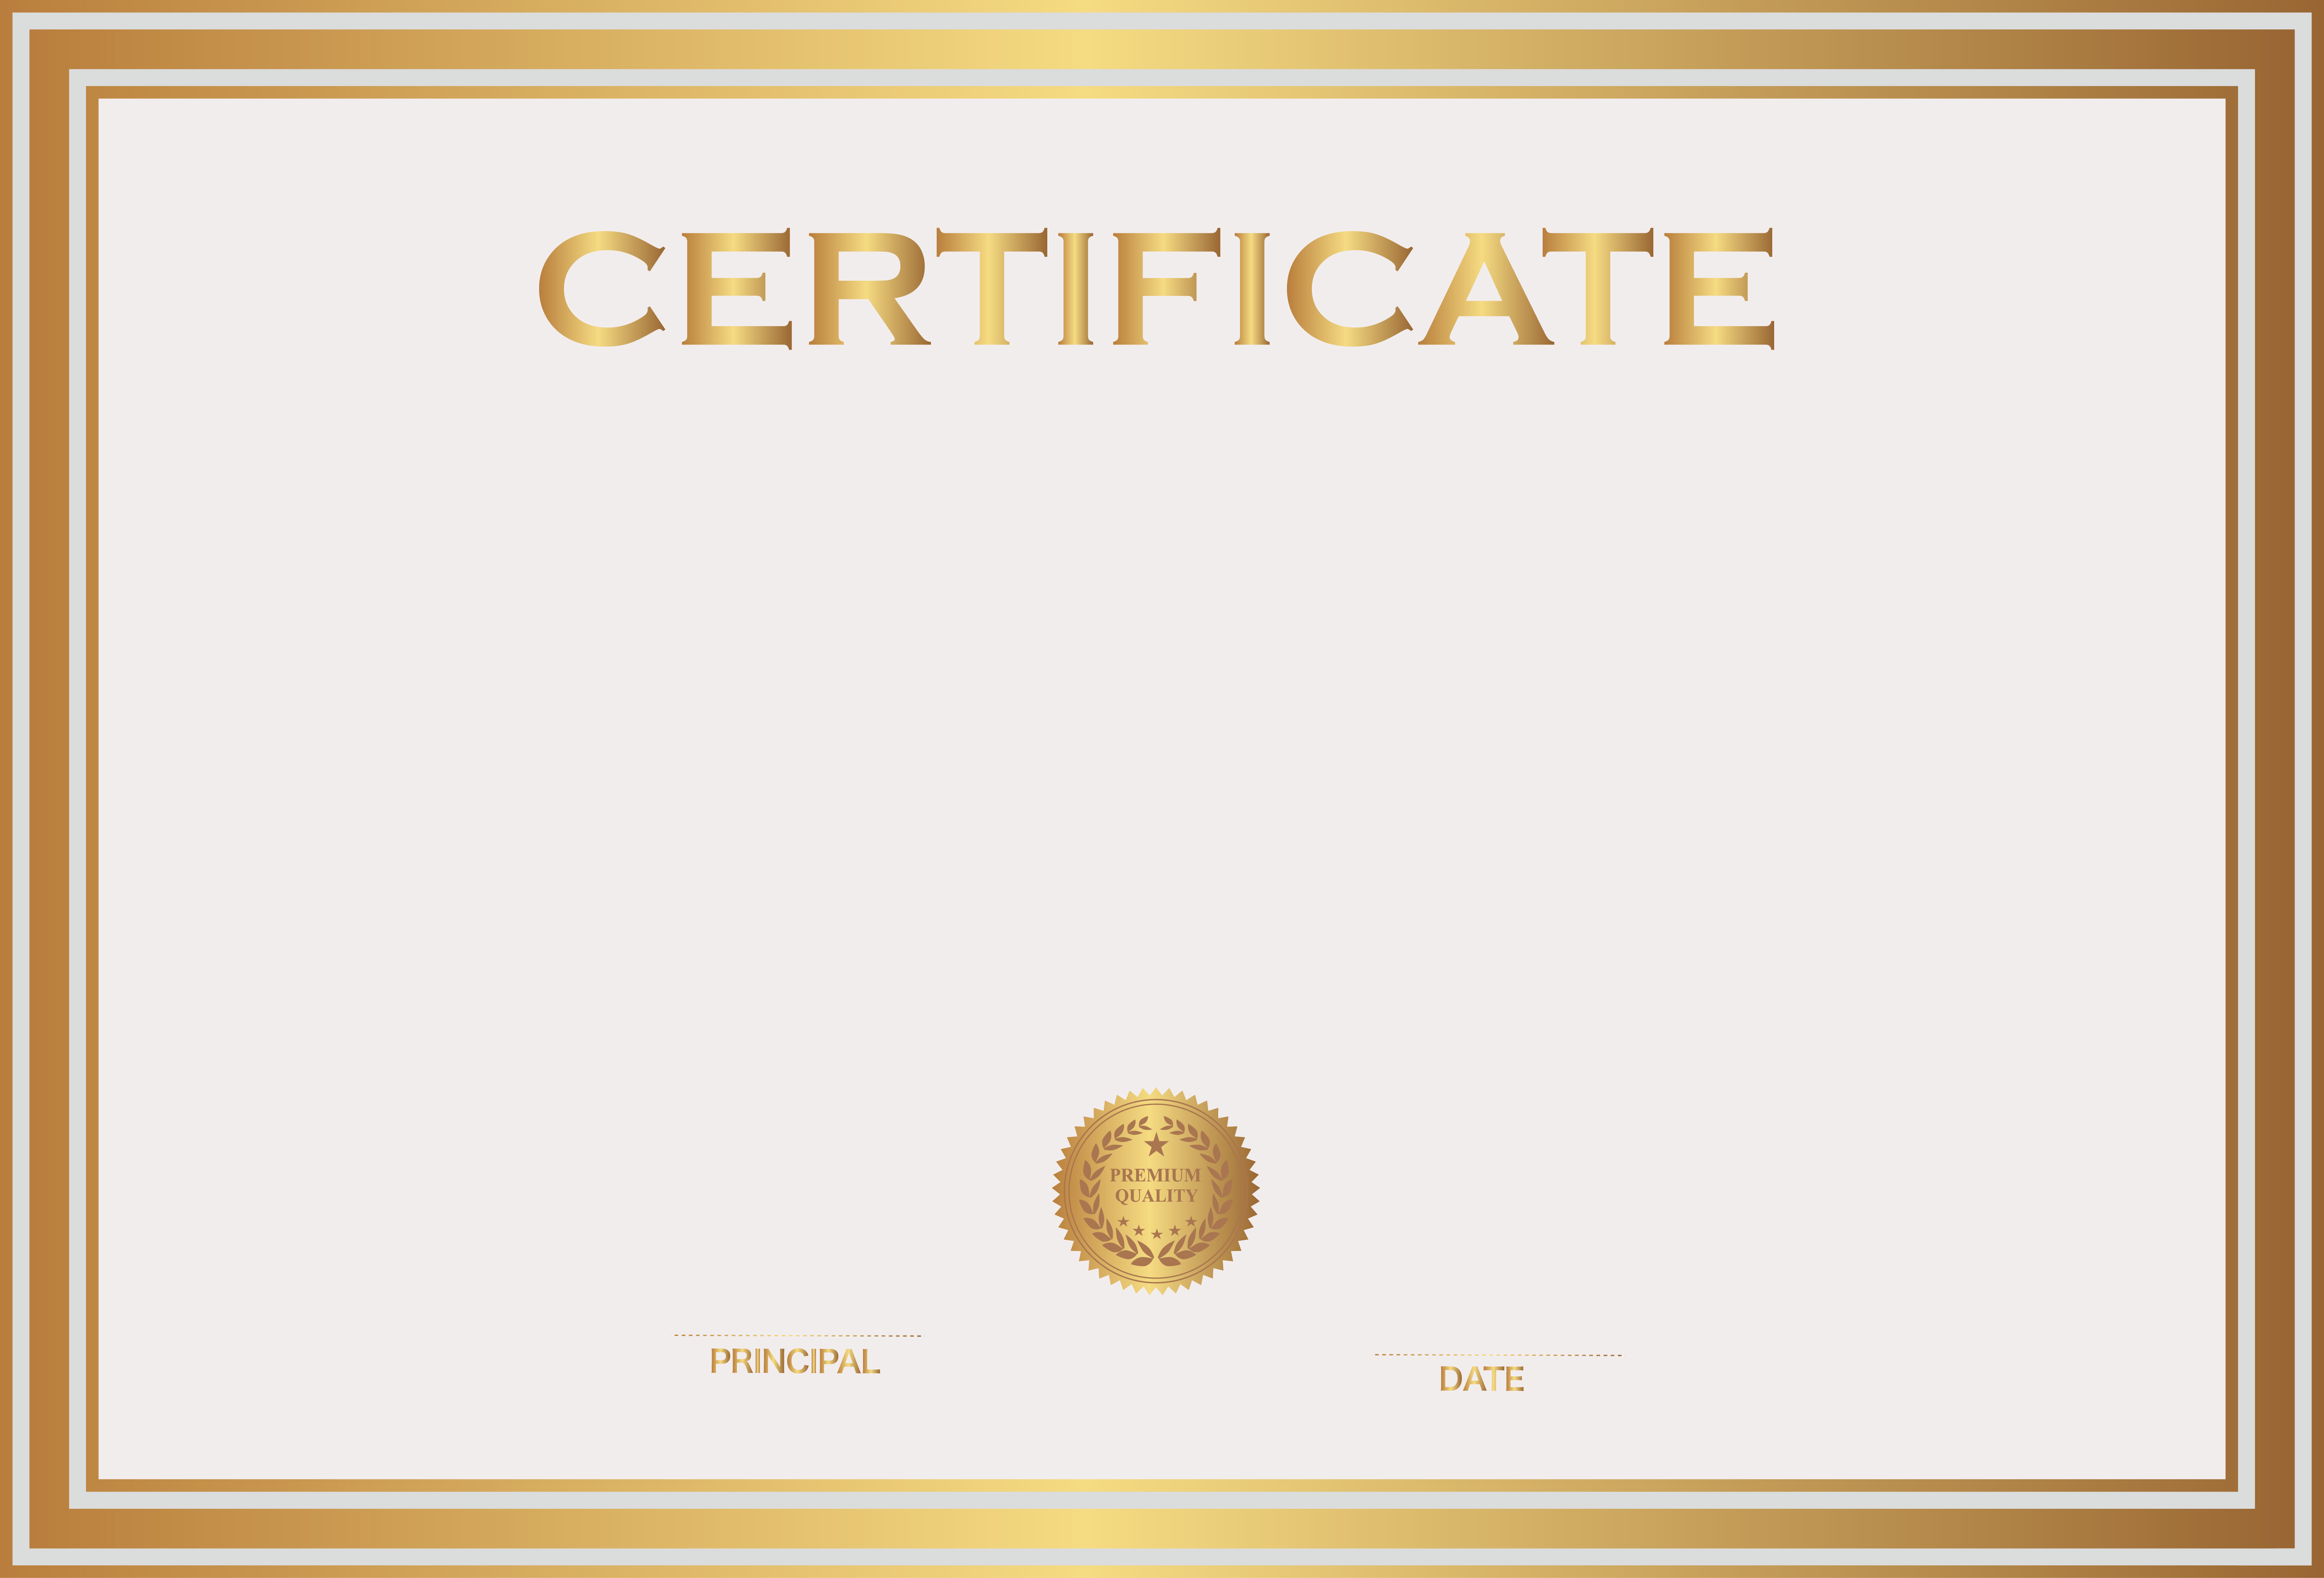 Certificate Template Free Png Image PNG Image